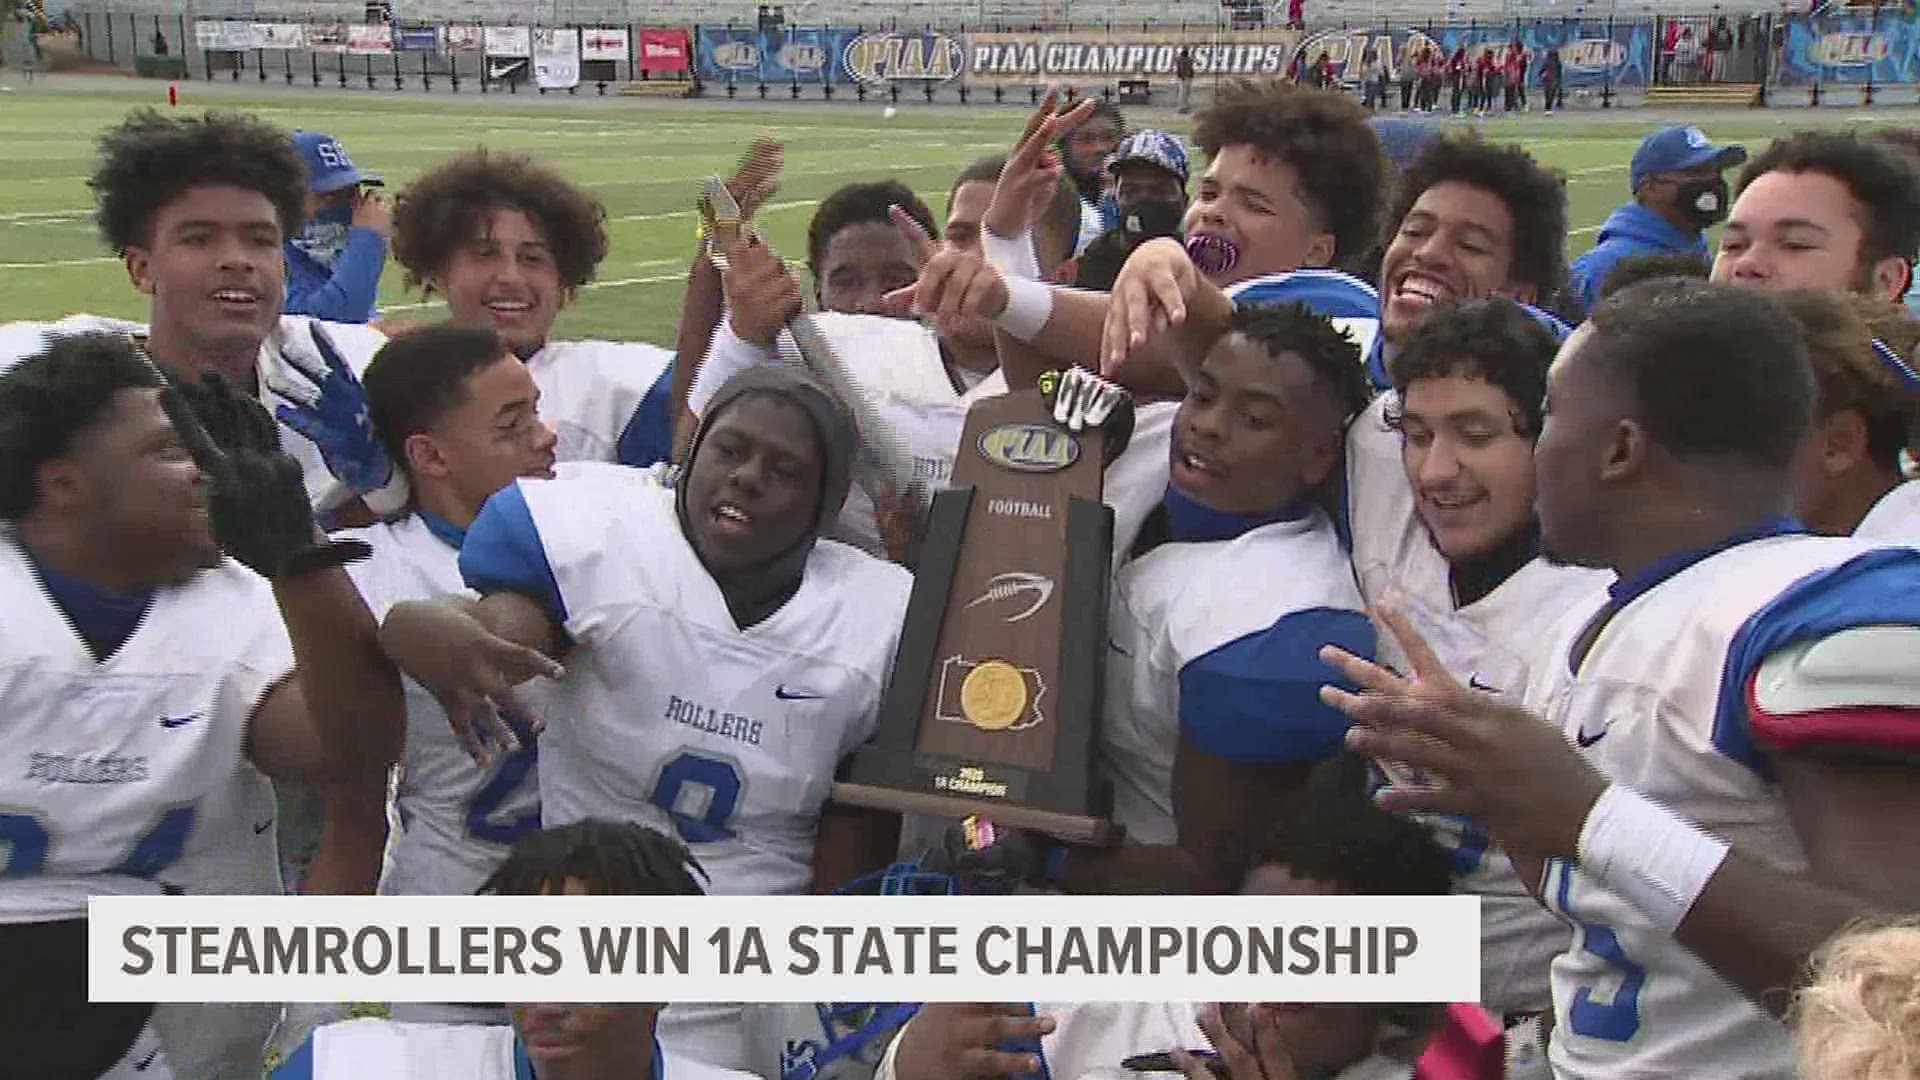 A pair of fourth quarter pick-sixes helped the Steamrollers bring another state title back to title town.